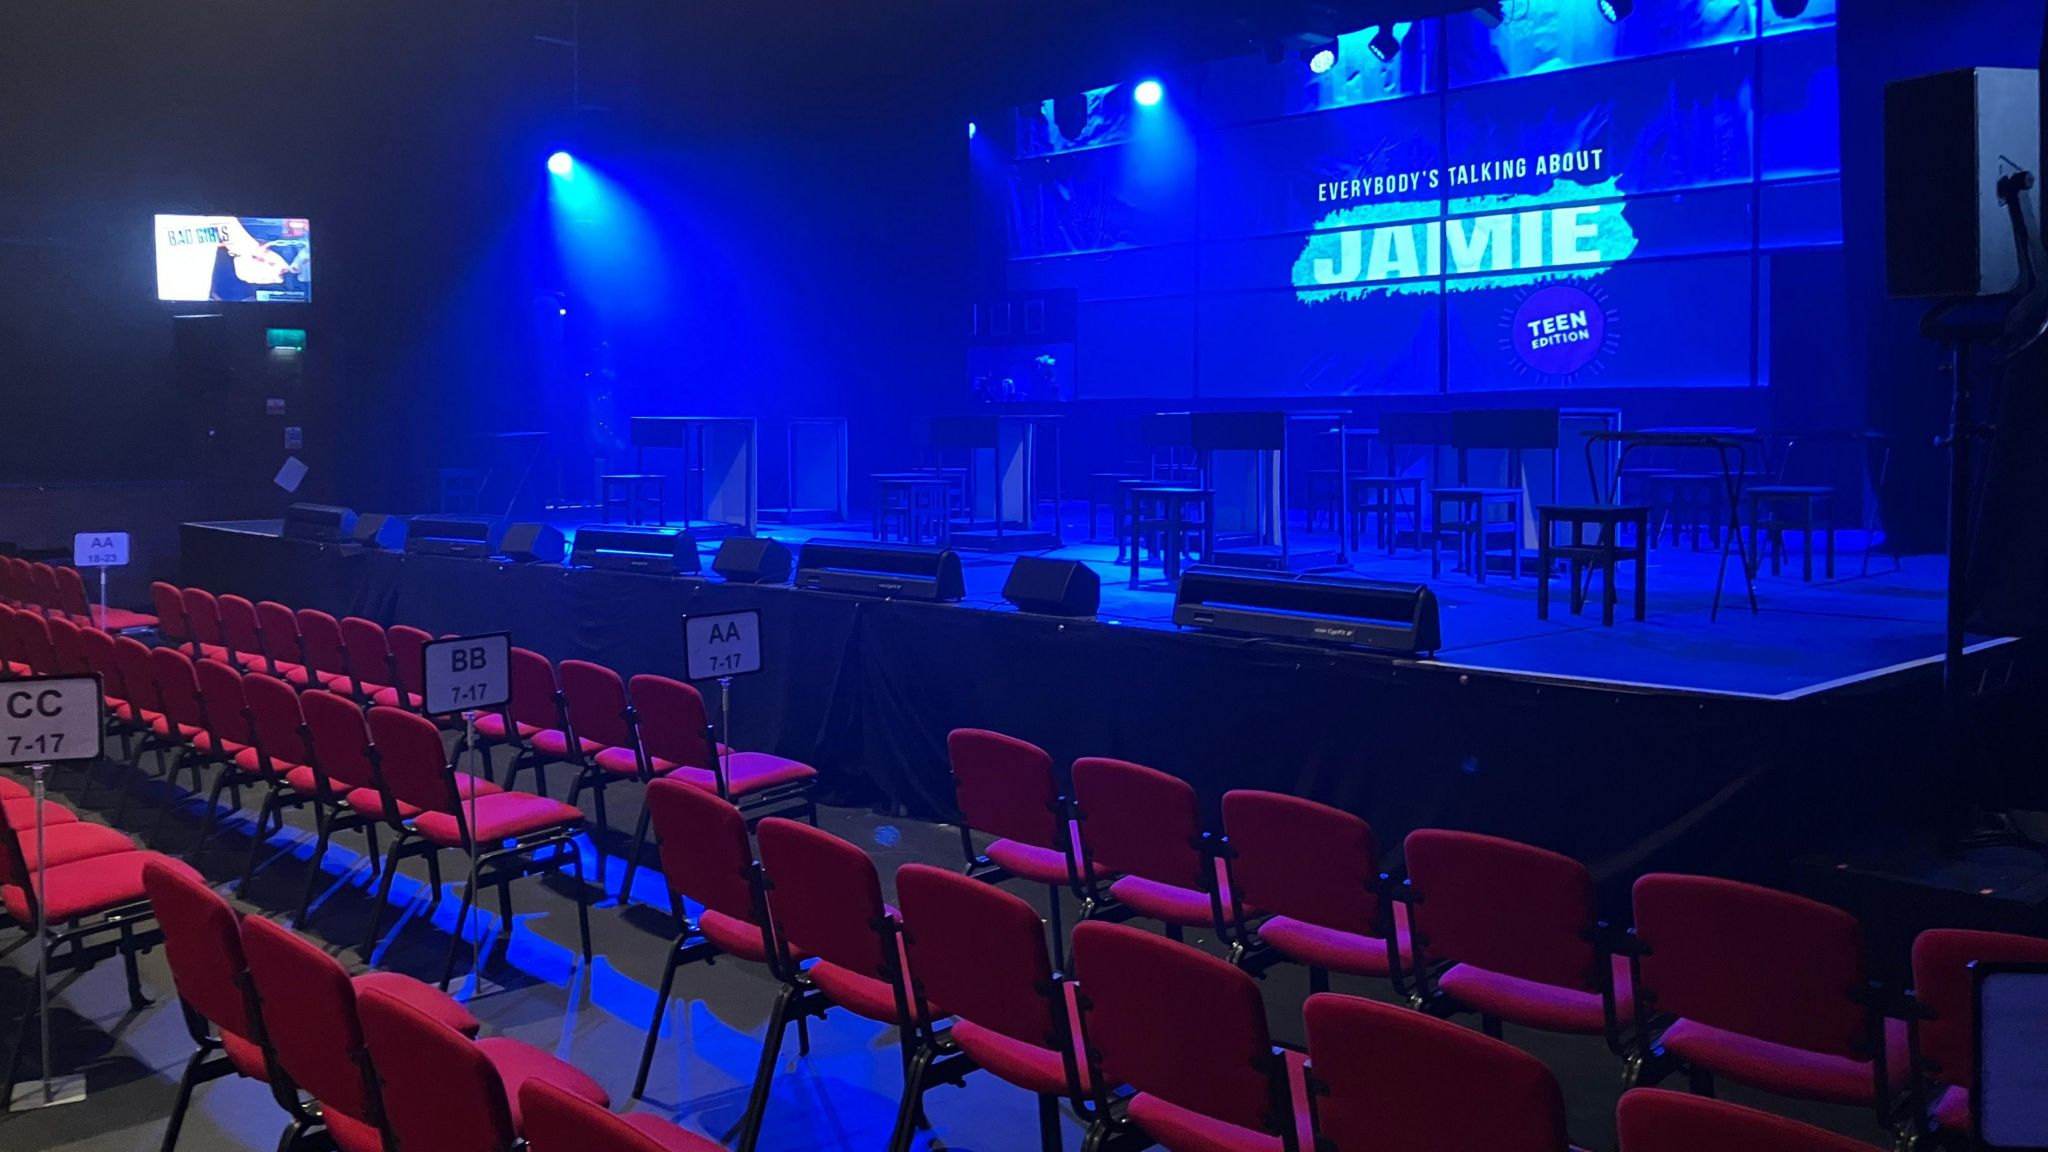 Red seats in rows in front of the stage at the Forum Theatre in Romiley